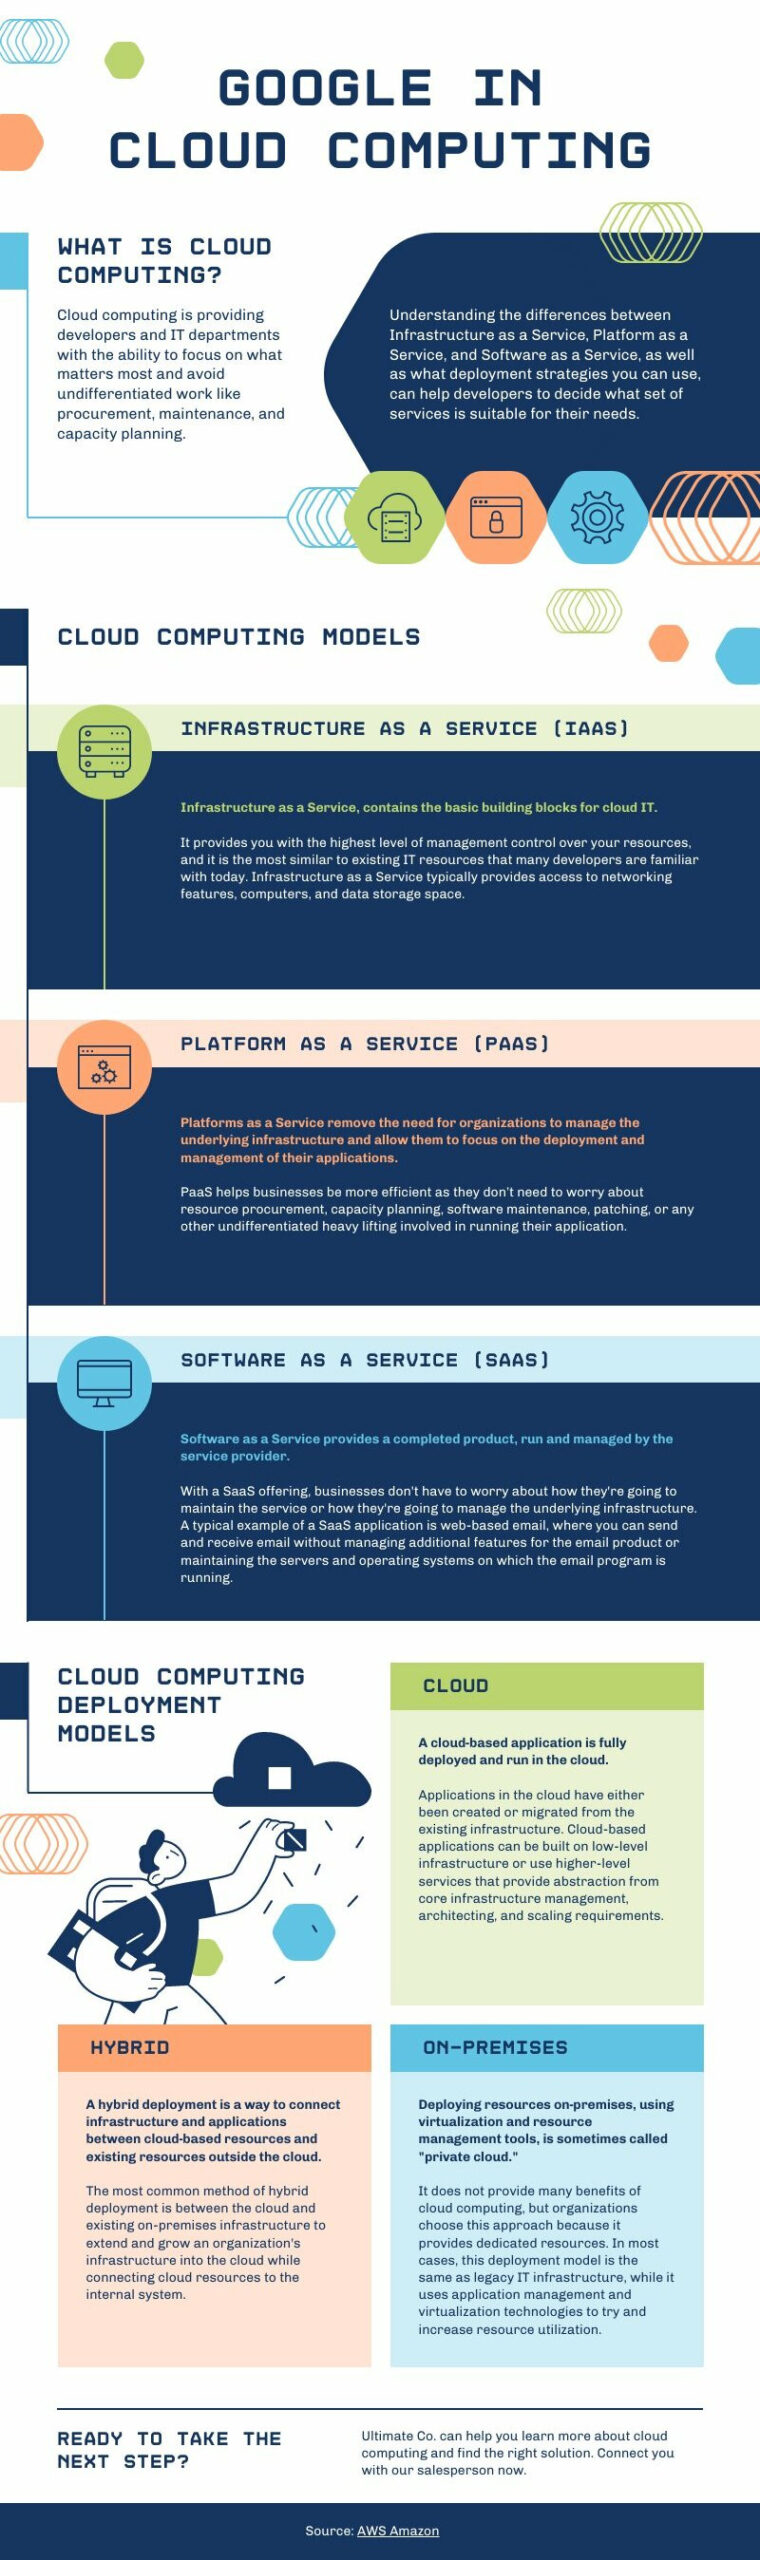 google in cloud computing infographic